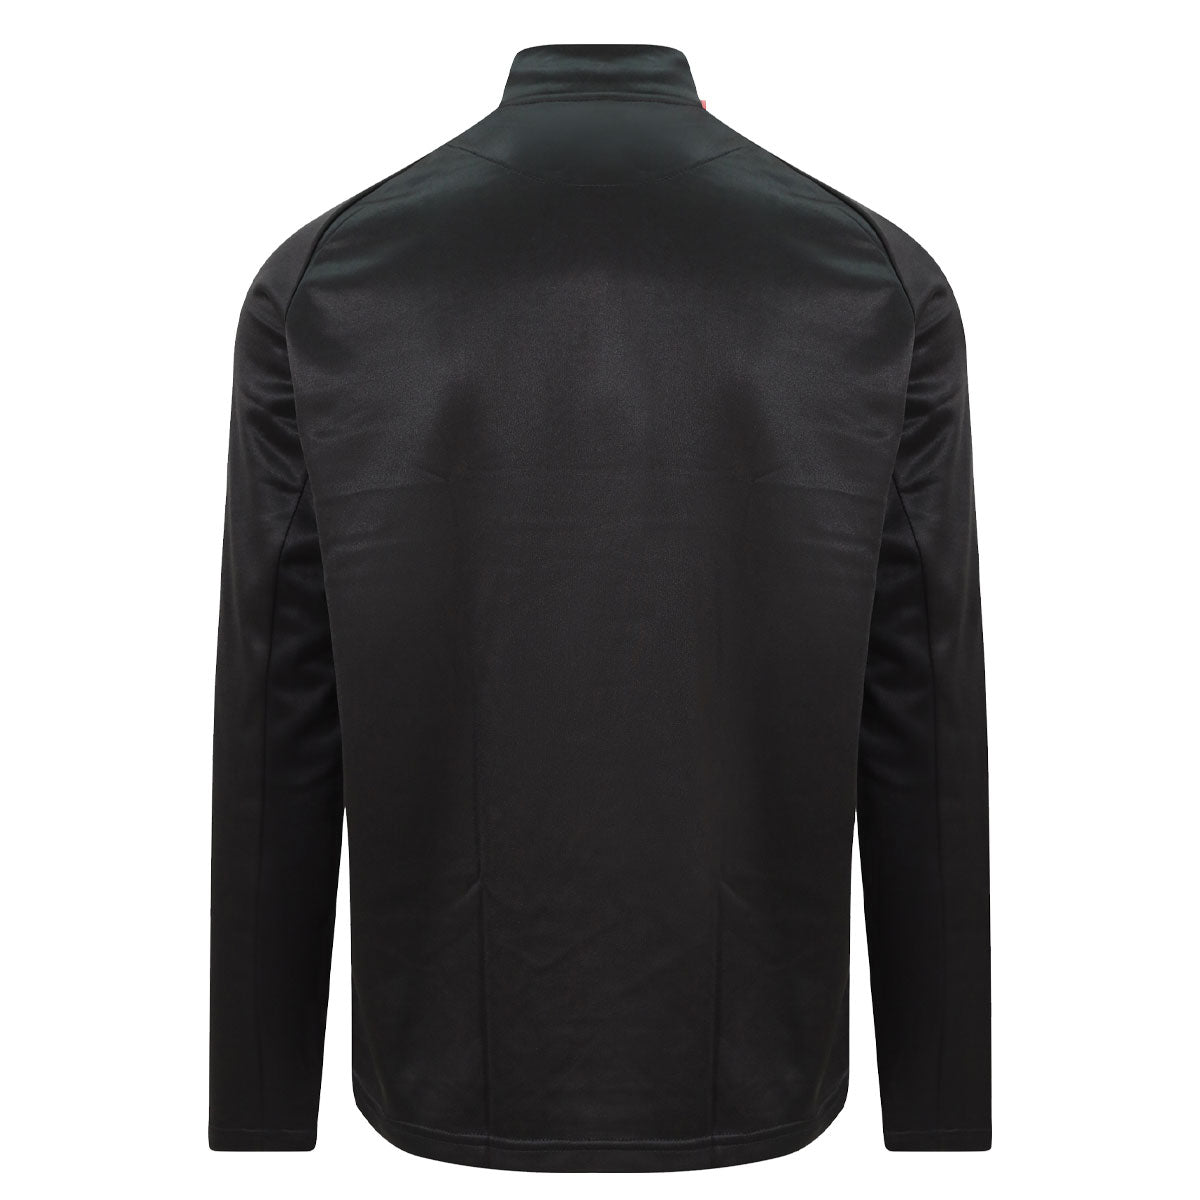 Mc Keever Ireland Supporters Core 22 Warm Top - Adult - Black